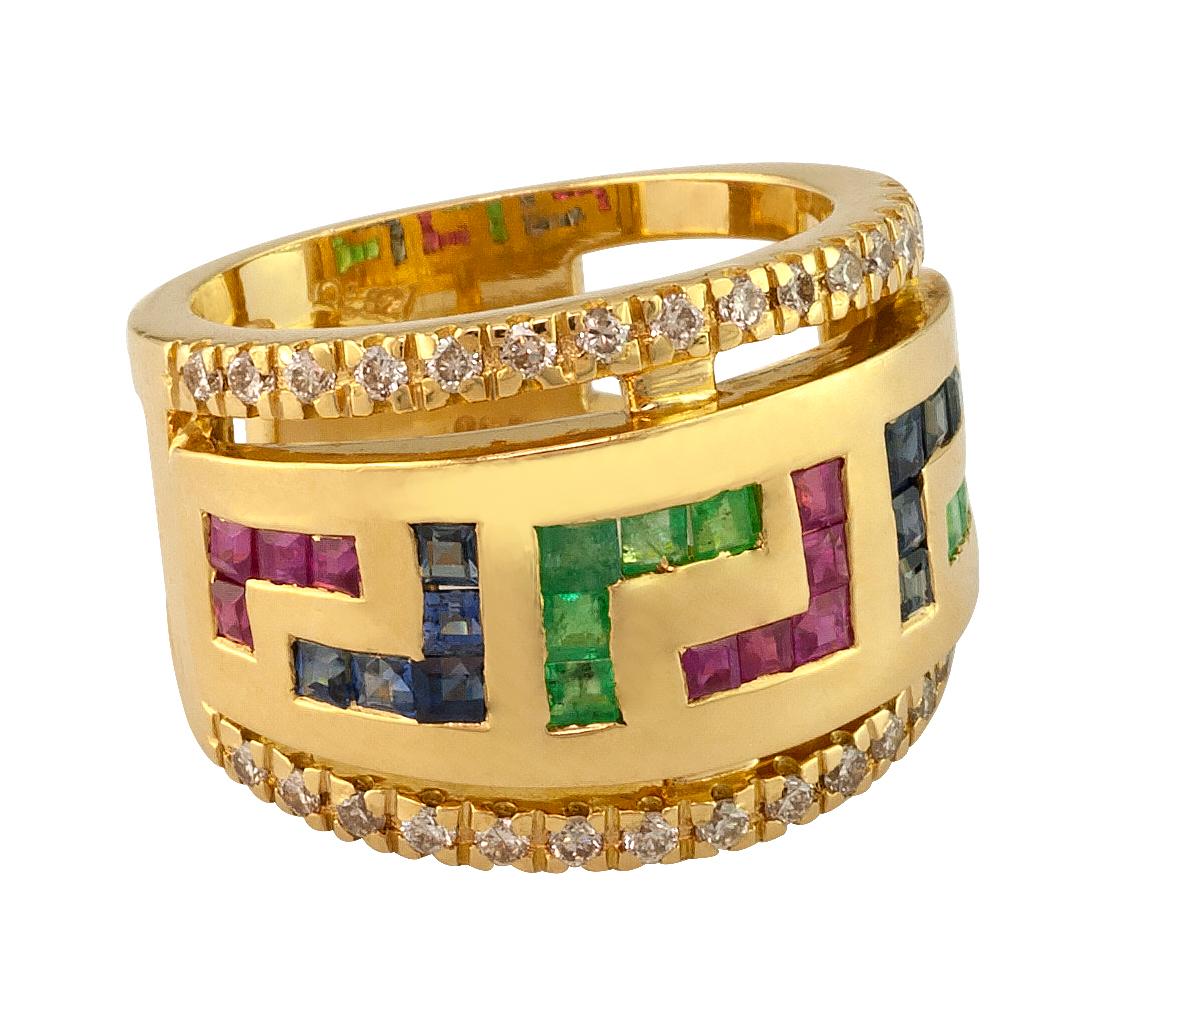 S.Georgios designer 18 Karat Yellow Gold Ring featuring the Greek Key design symbolizing eternity. This gorgeous band rind has 30 Brilliant Cut White Diamonds total weight of 0.50 Carat and 28 Princess cut Rubies, Sapphires and Emeralds total weight